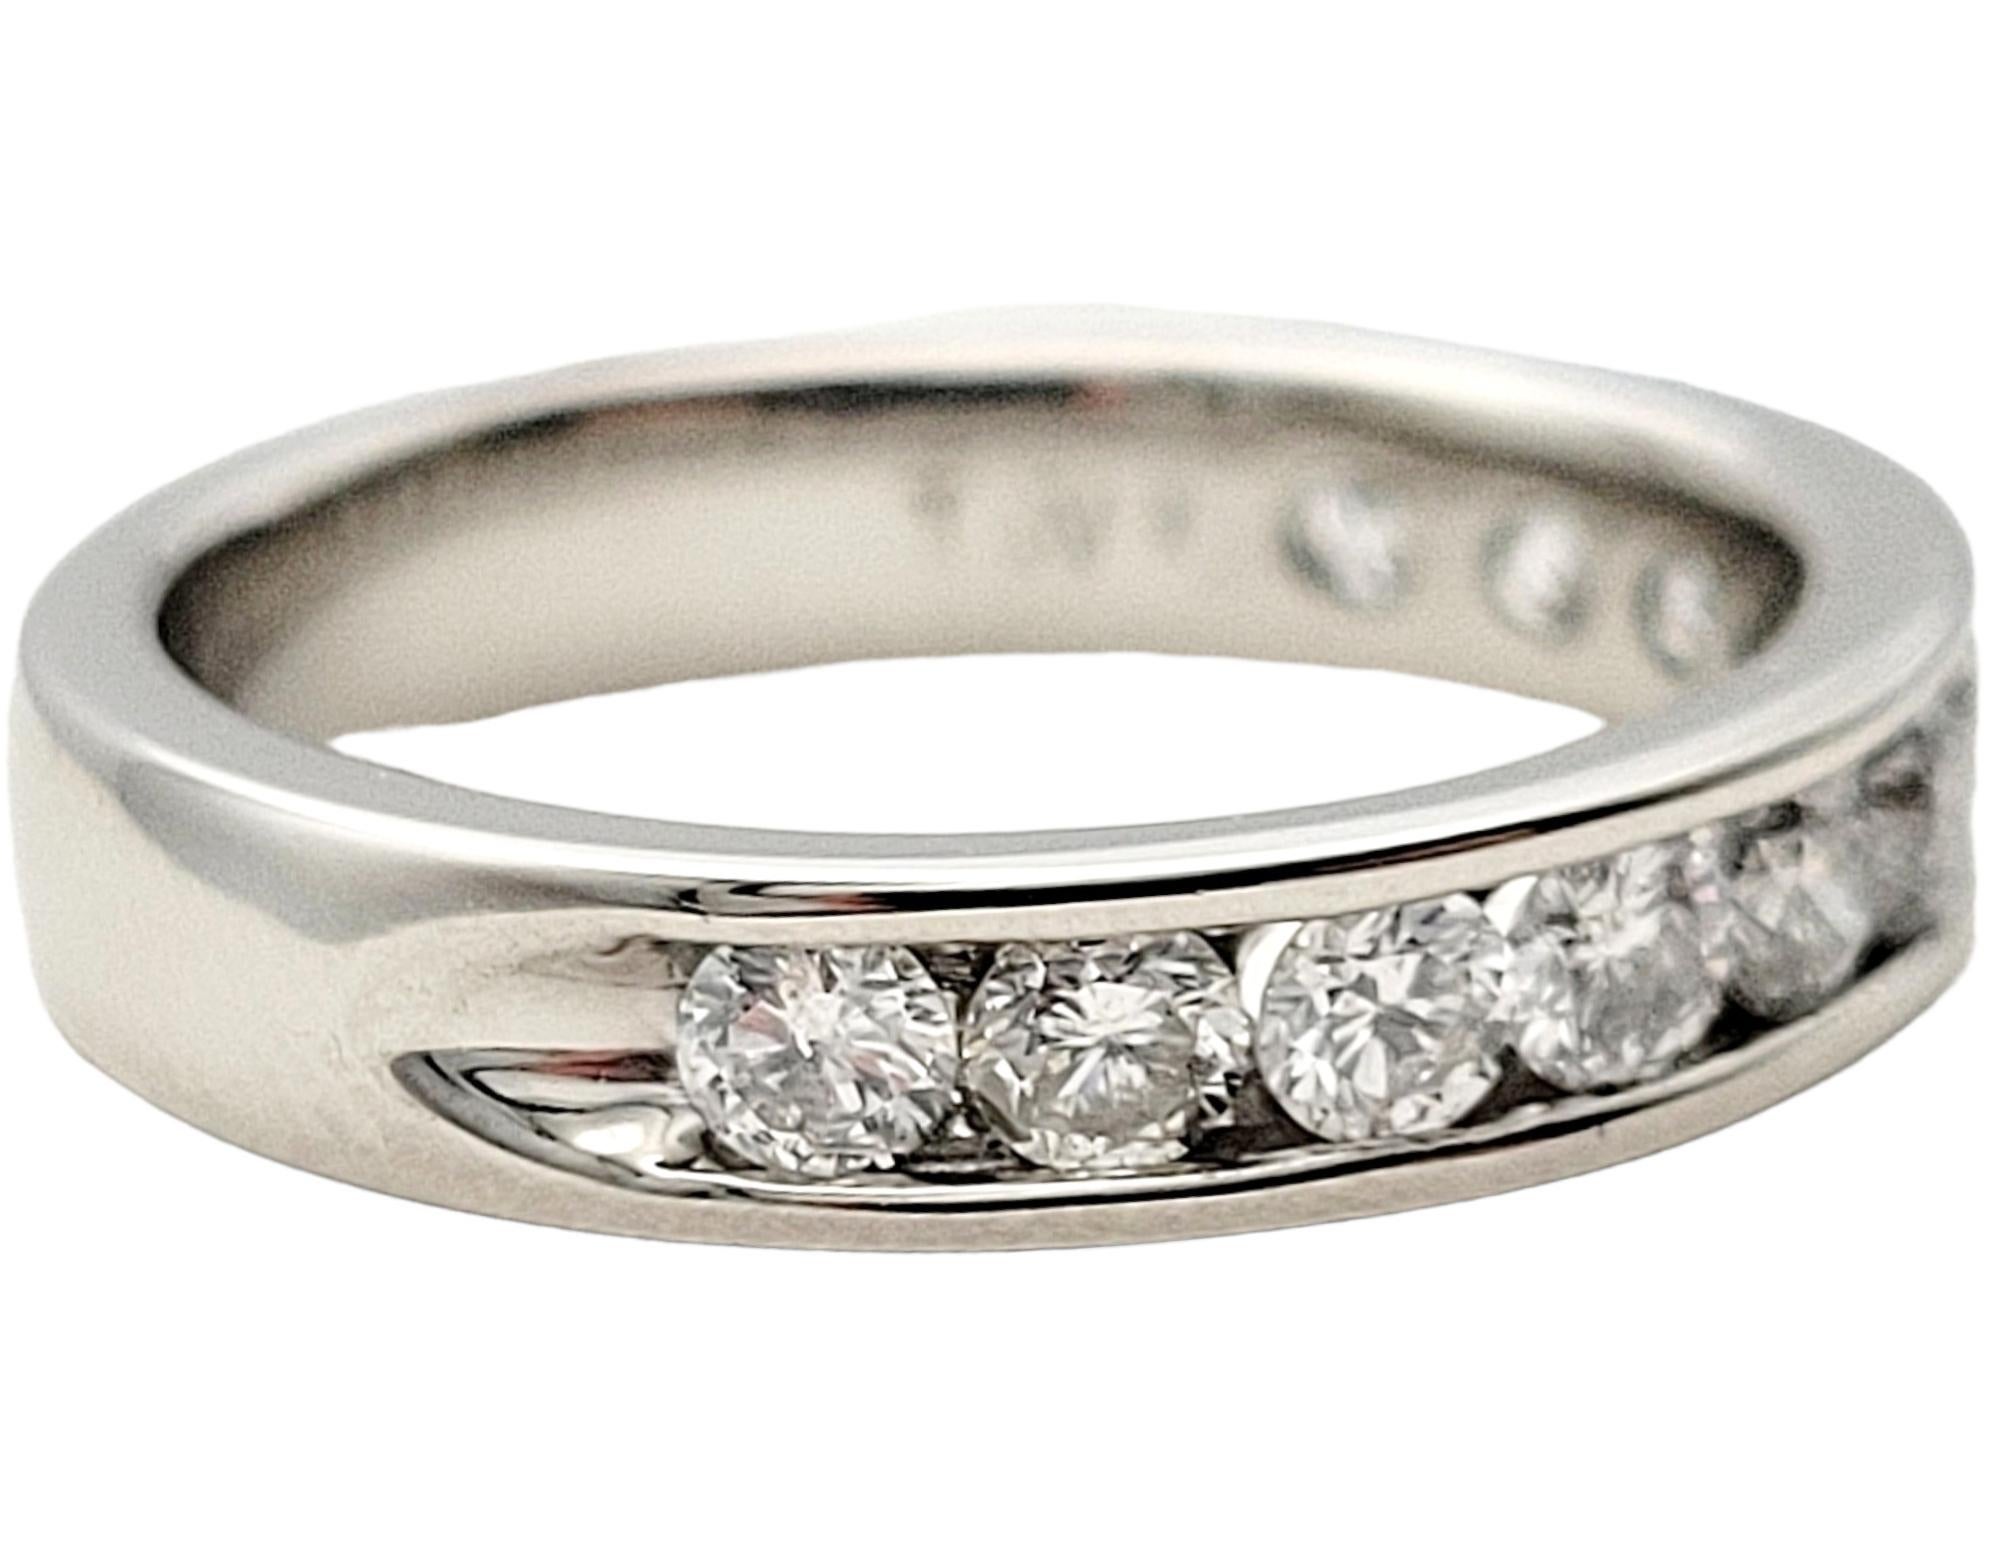 Ring Size: 6.75

Introducing an exquisite channel set round diamond semi-eternity band ring – a timeless symbol of everlasting love and elegance. Crafted with the utmost precision, this stunning piece features a continuous row of brilliant round